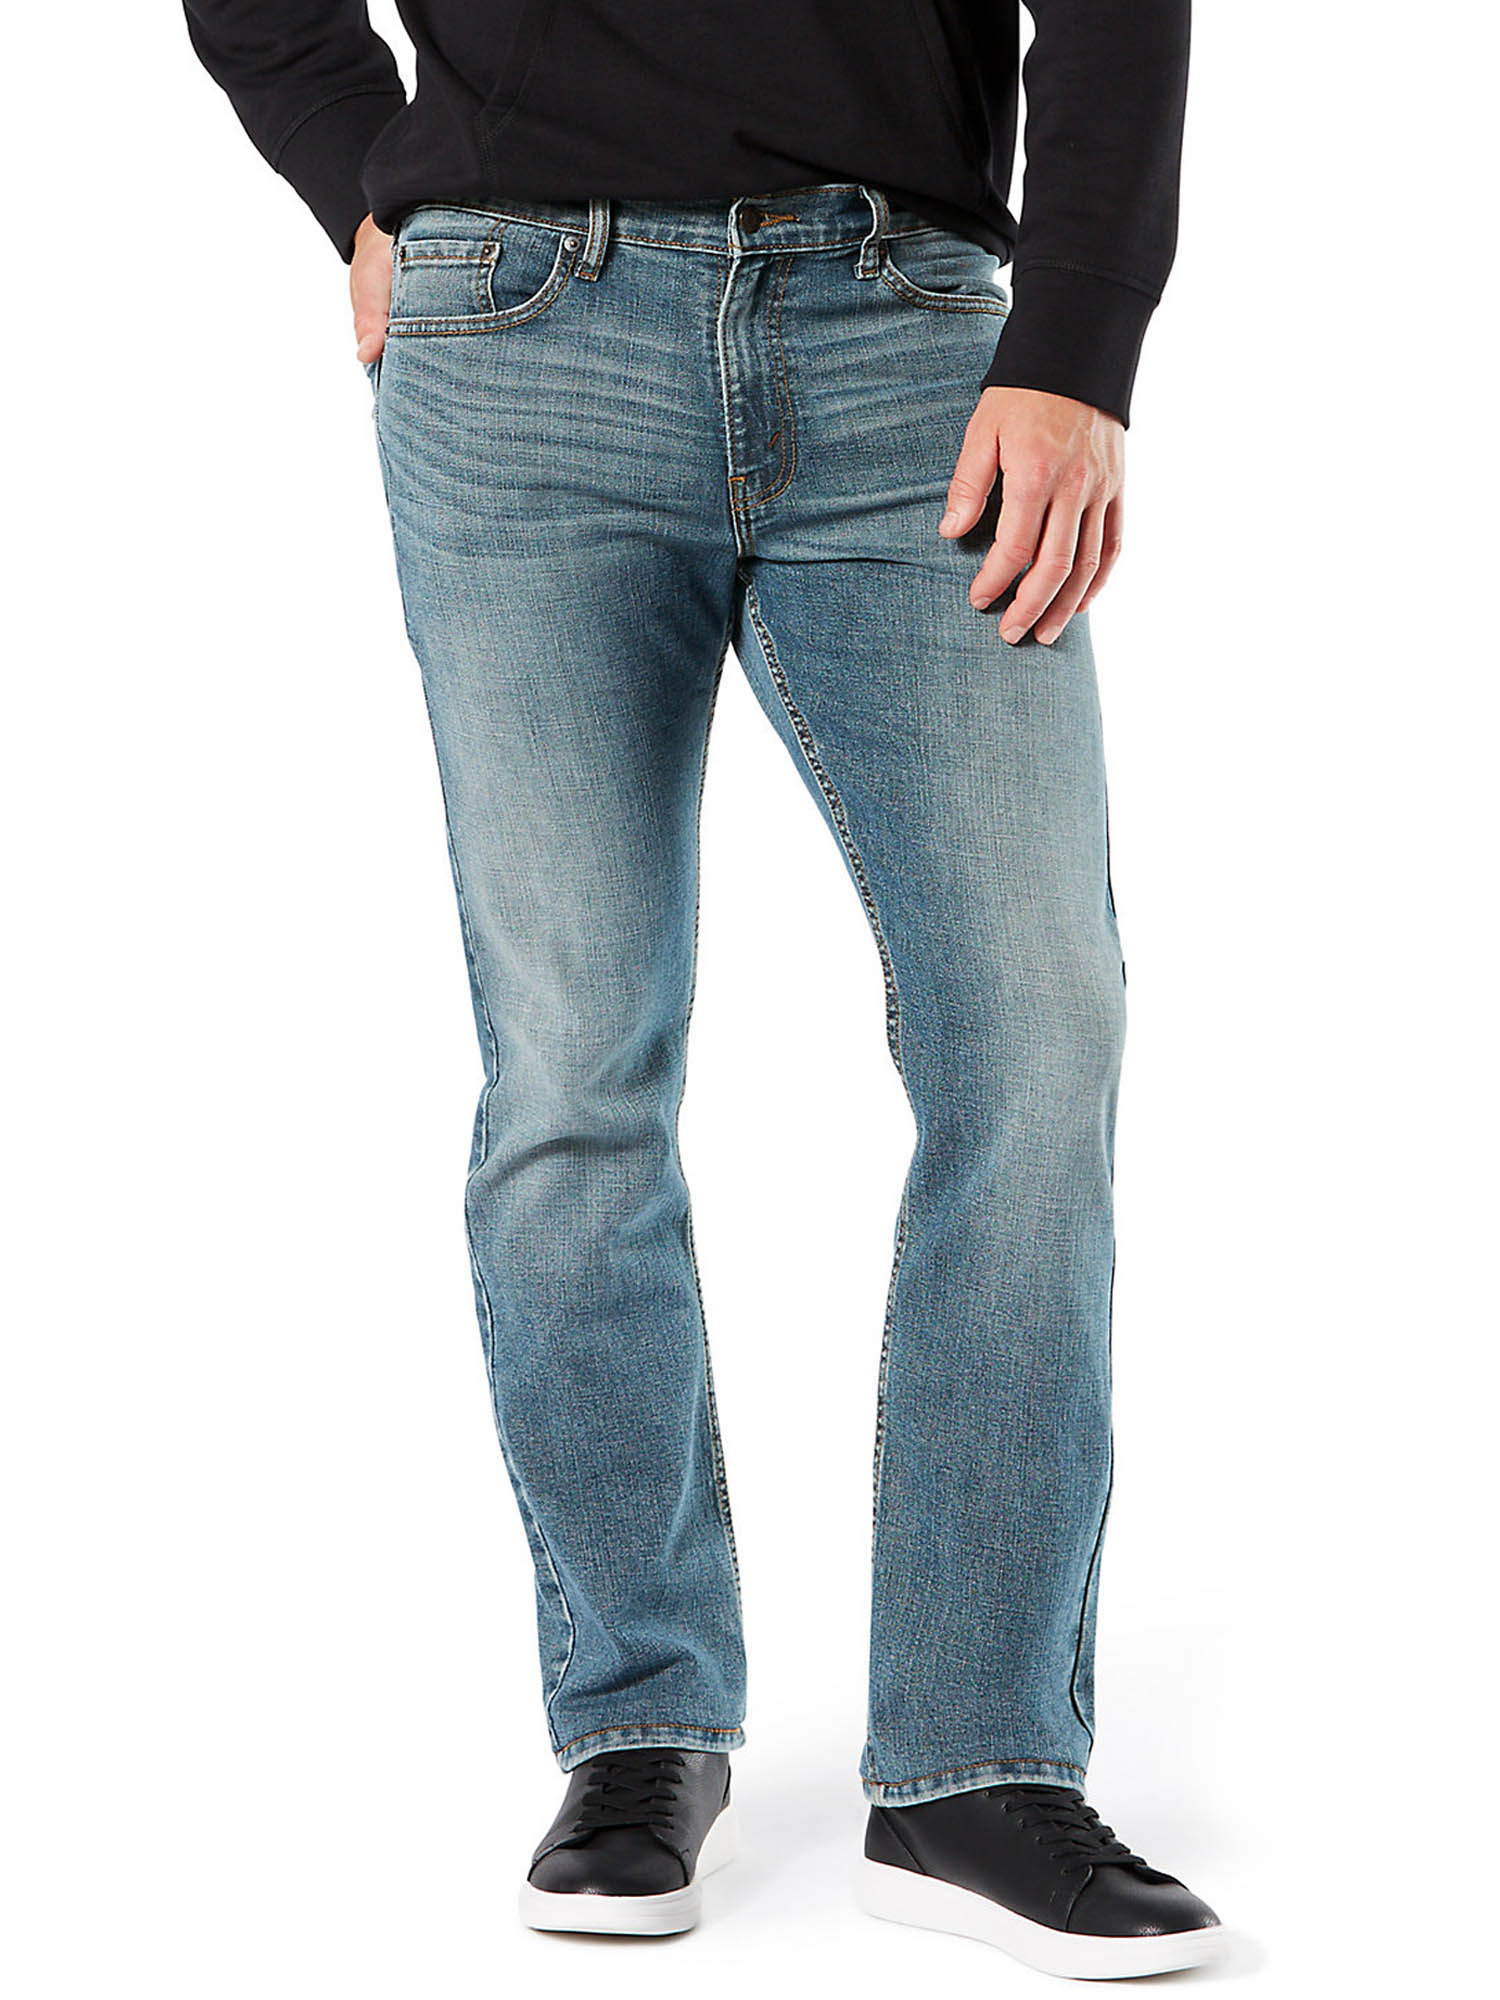 Signature by Levi Strauss & Co. Men's and Big and Tall Relaxed Fit Jeans - image 1 of 8